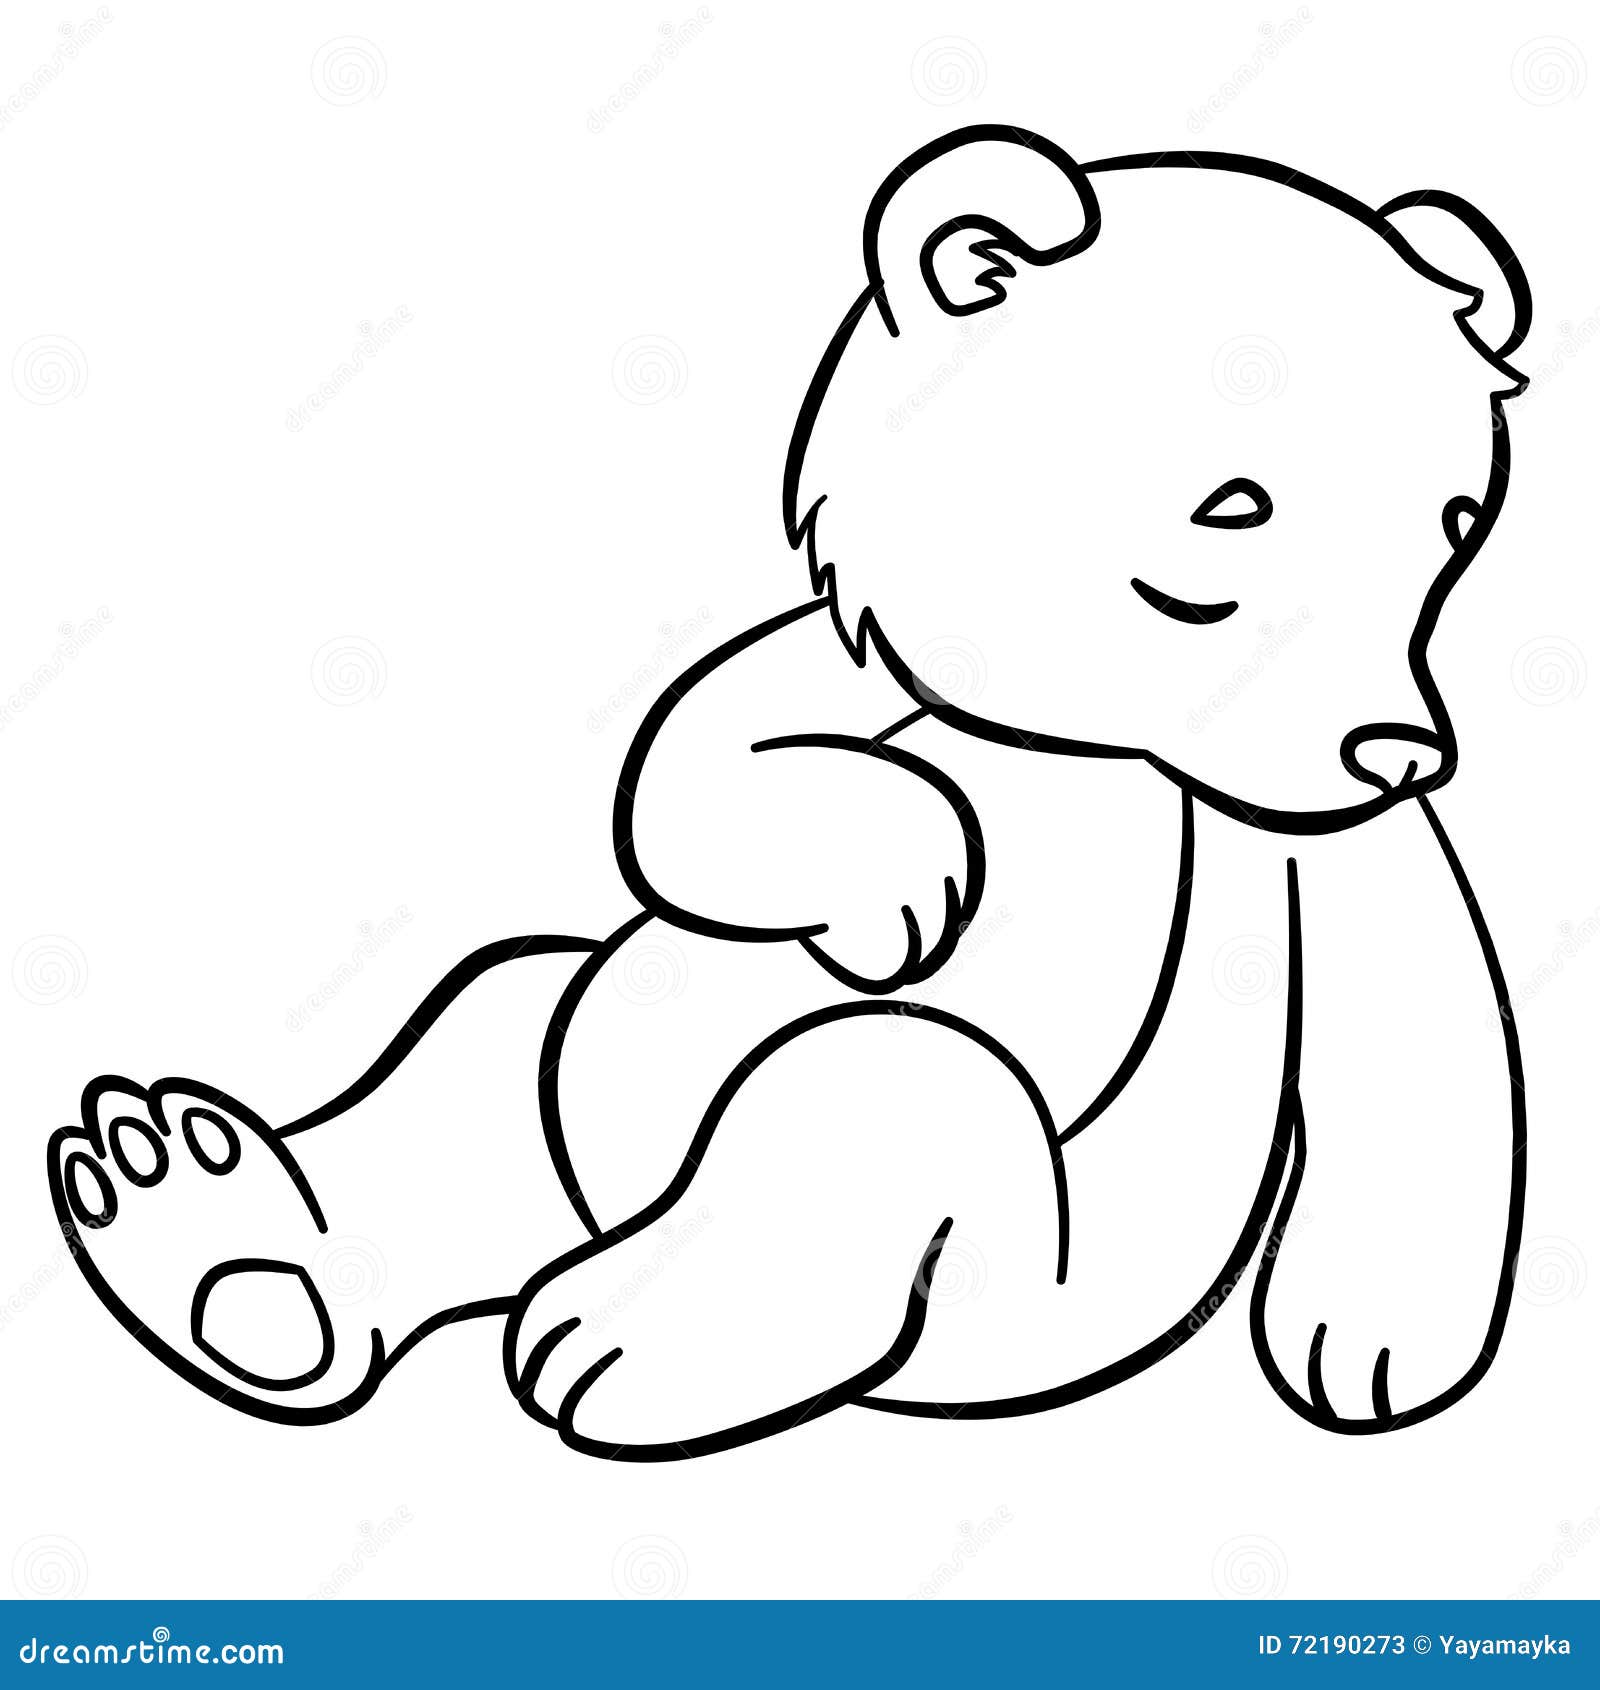 Coloring pages wild animals little cute baby bear sleeps stock vector